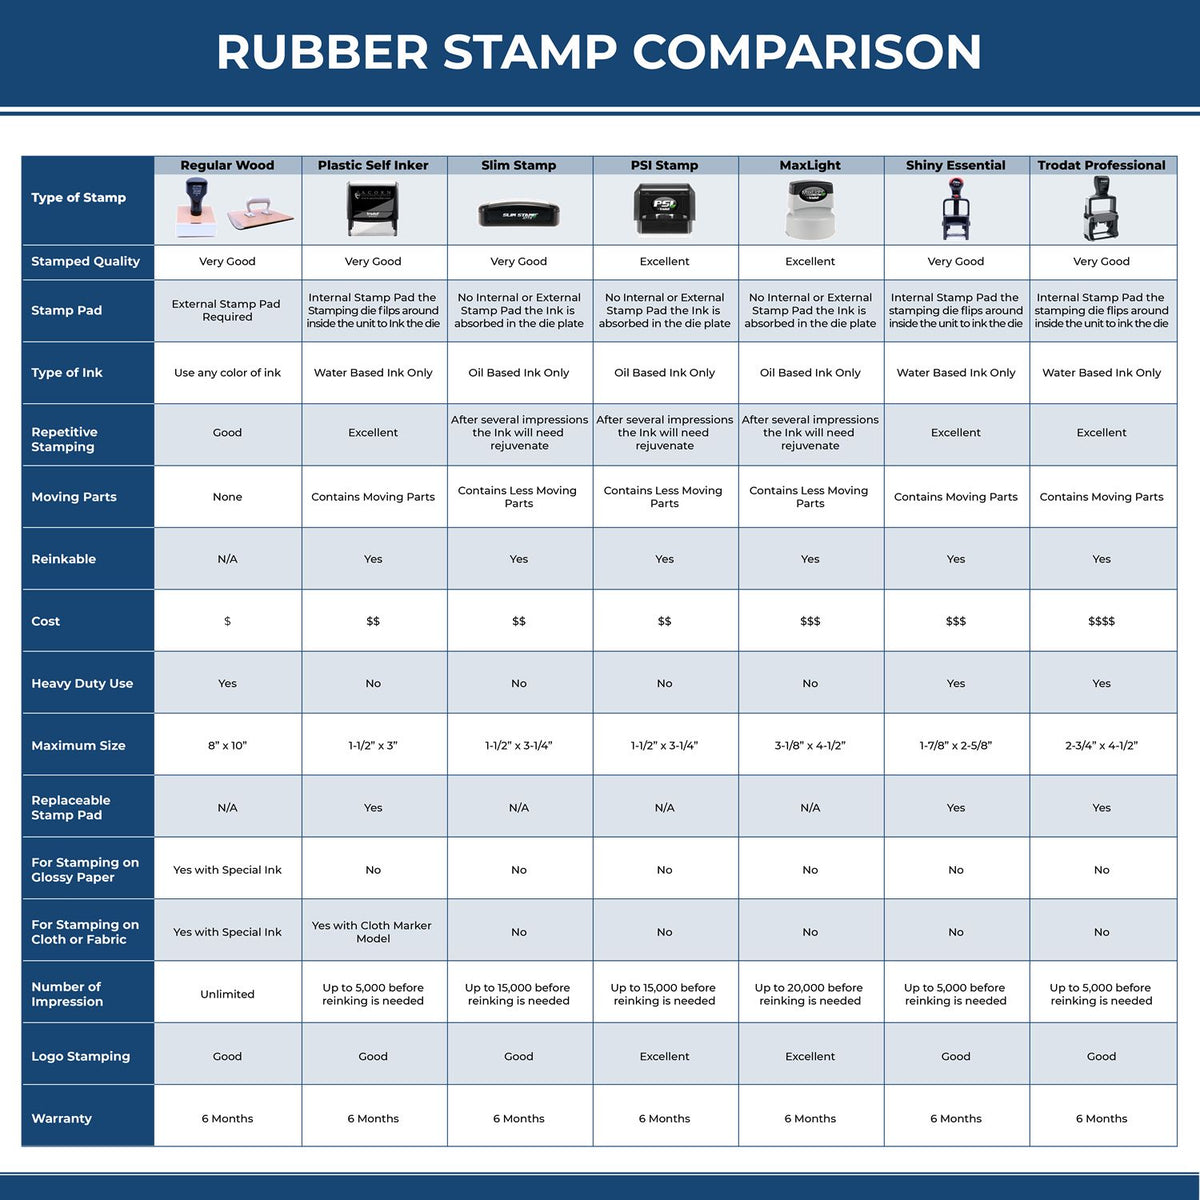 Large Self Inking Wrong Bank Stamp 4592S Rubber Stamp Comparison